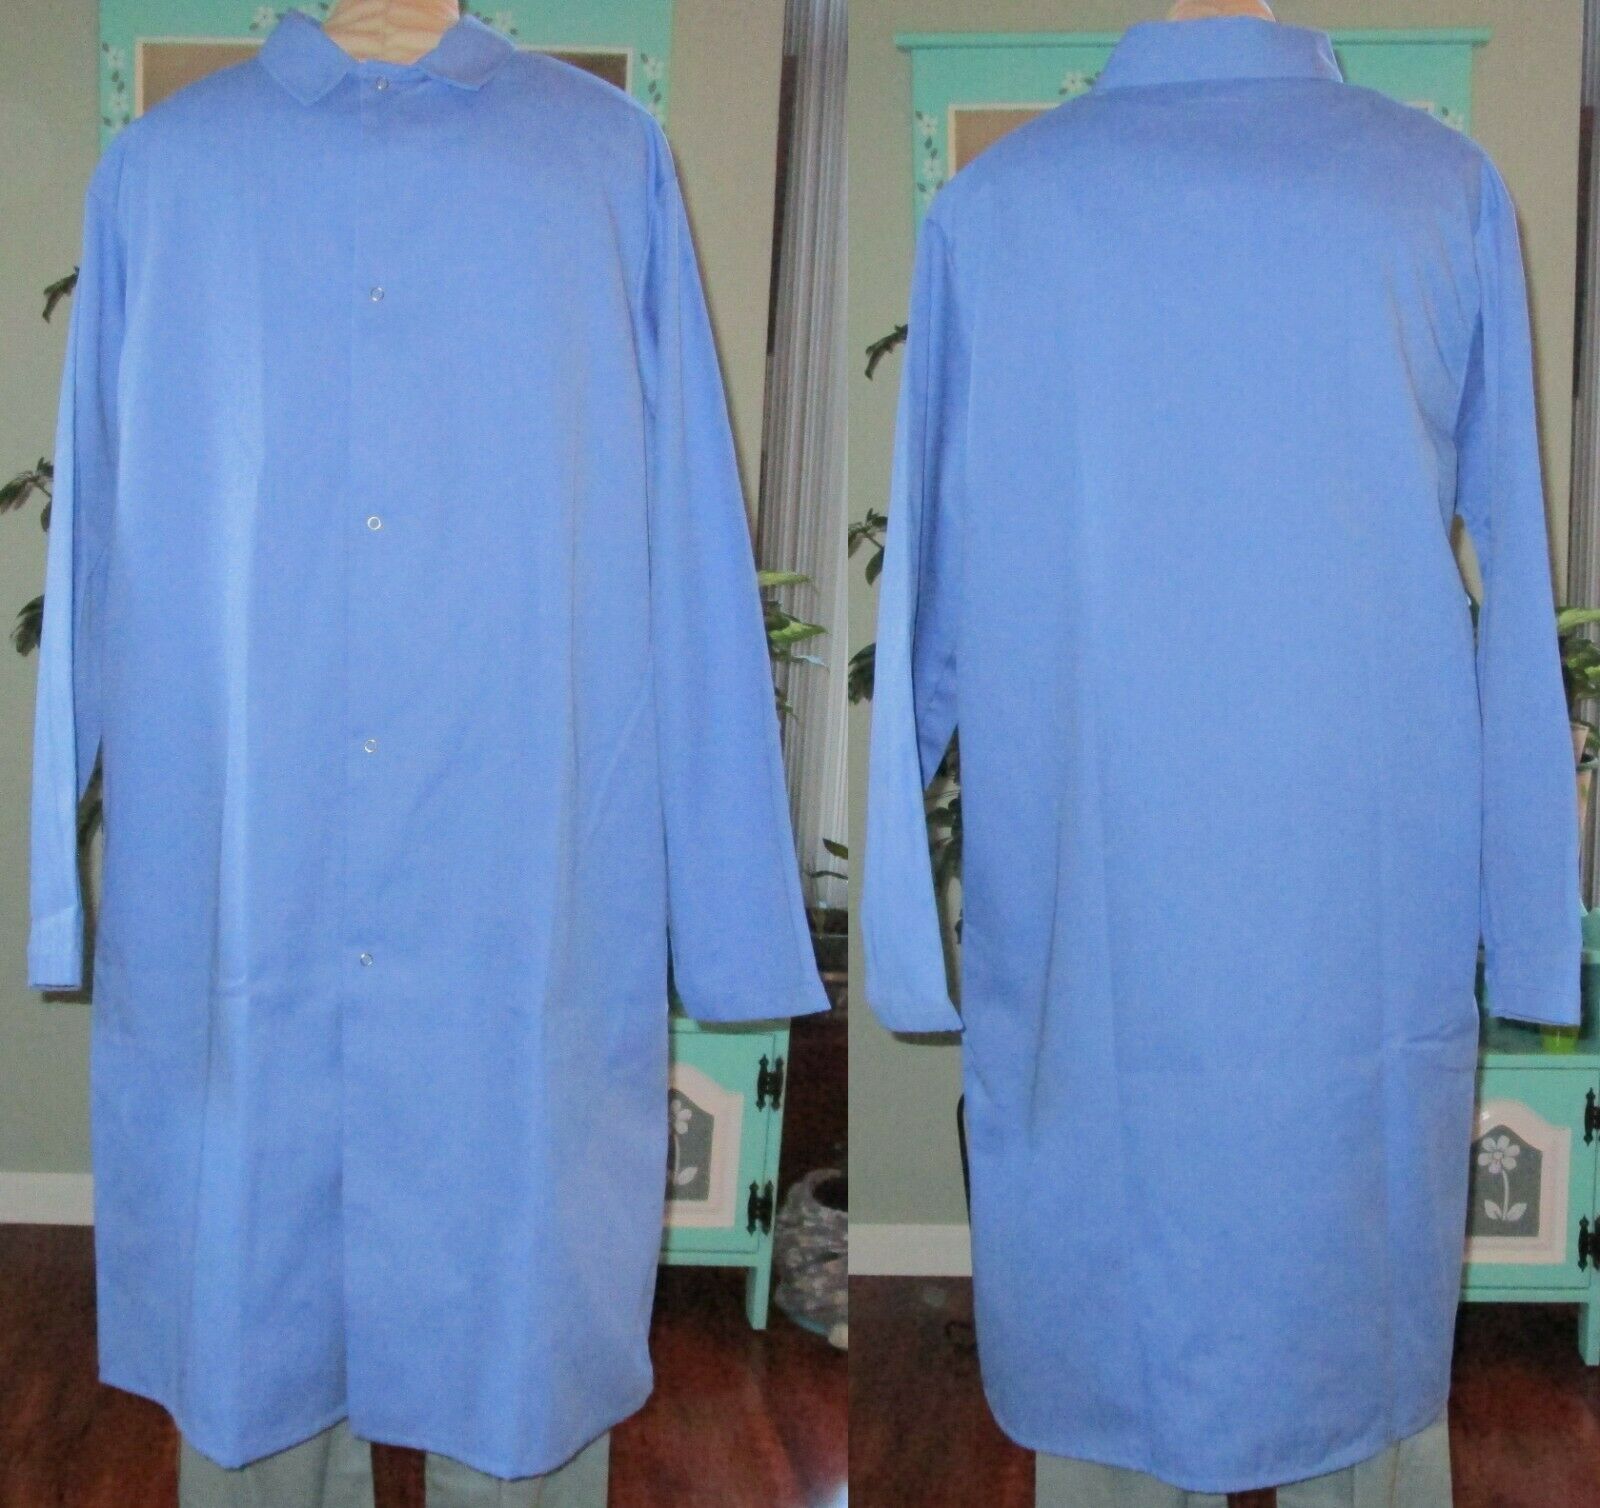 Best Medical L/s Lab Coat Gown Snaps & Side Vents 44" Length Sizes L To 5x Blue